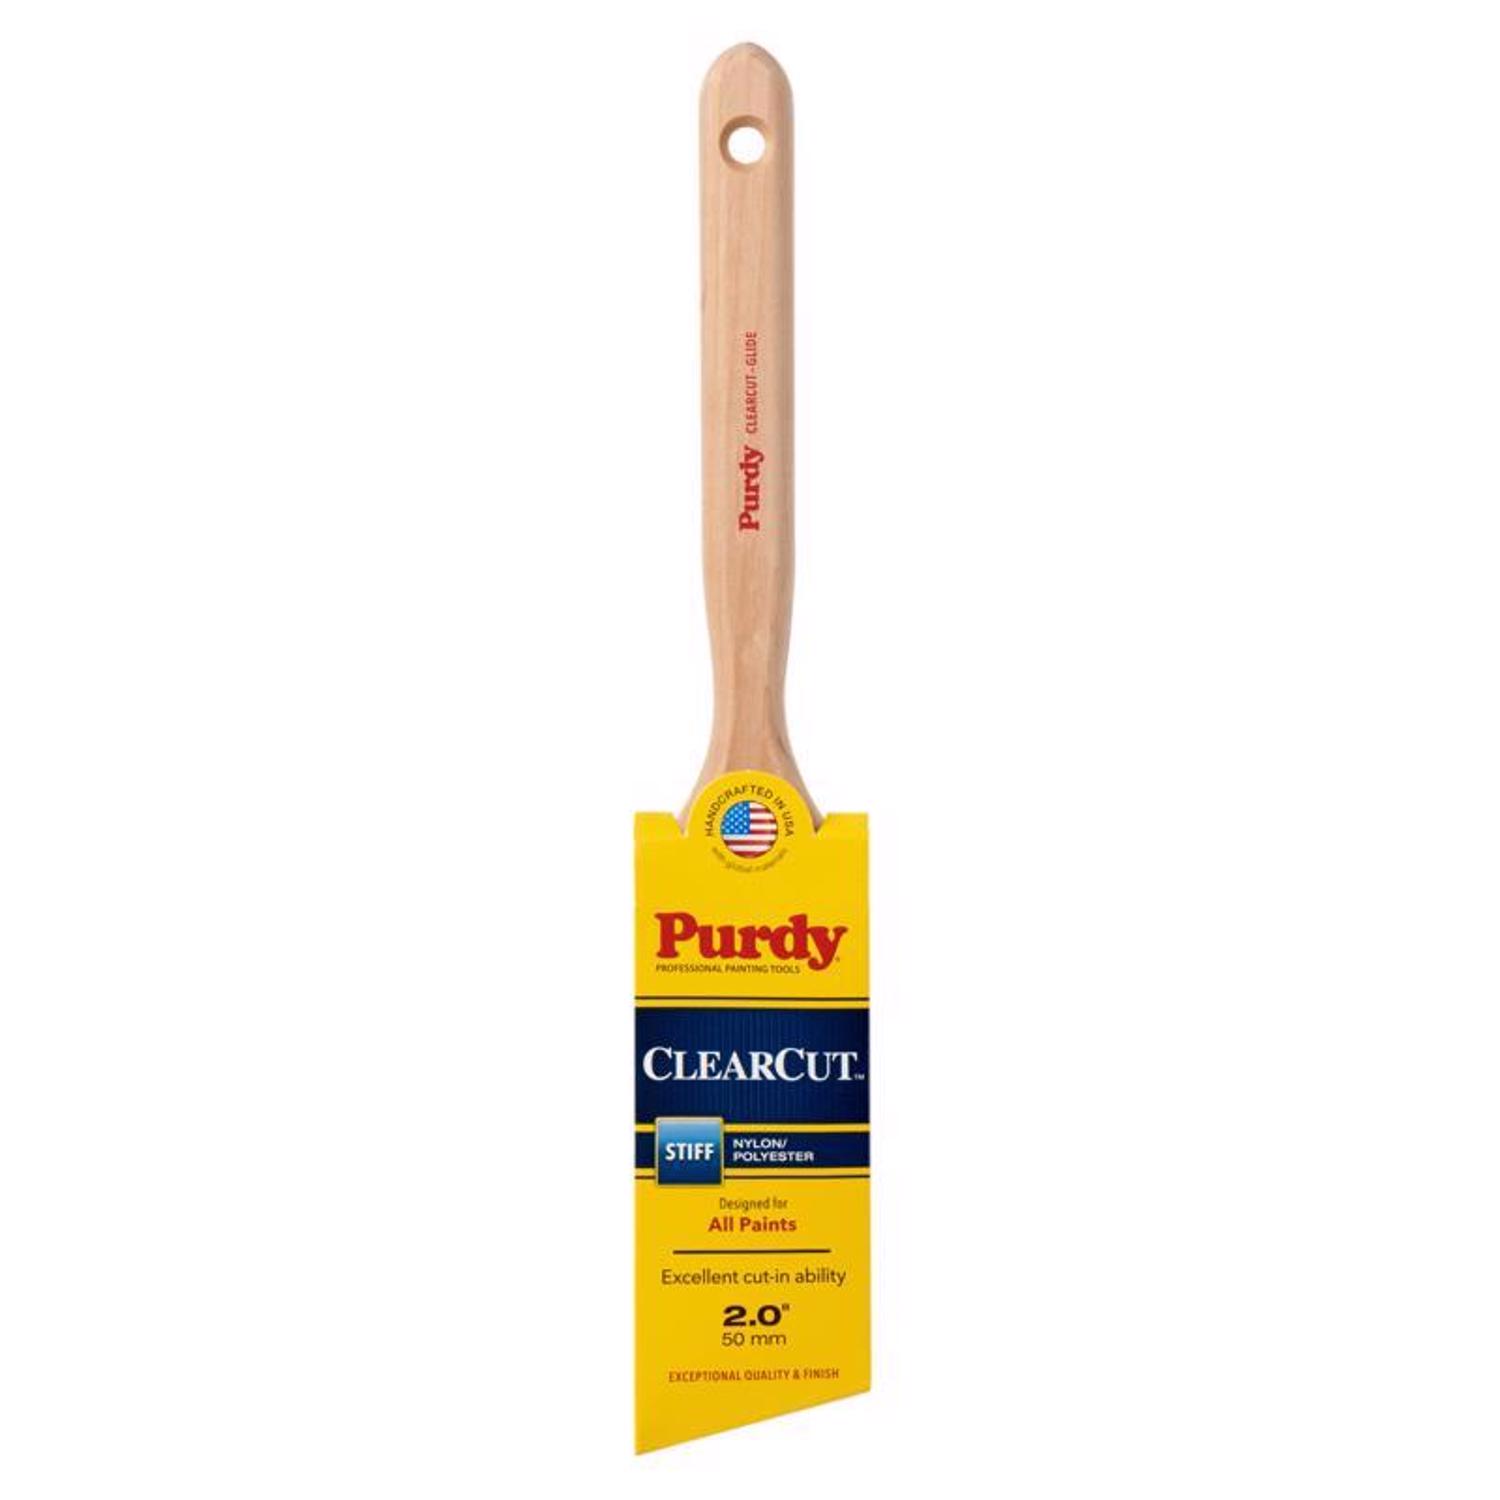 Photos - Putty Knife / Painting Tool Purdy Clearcut Glide 2 in. Stiff Angle Trim Paint Brush 144152120